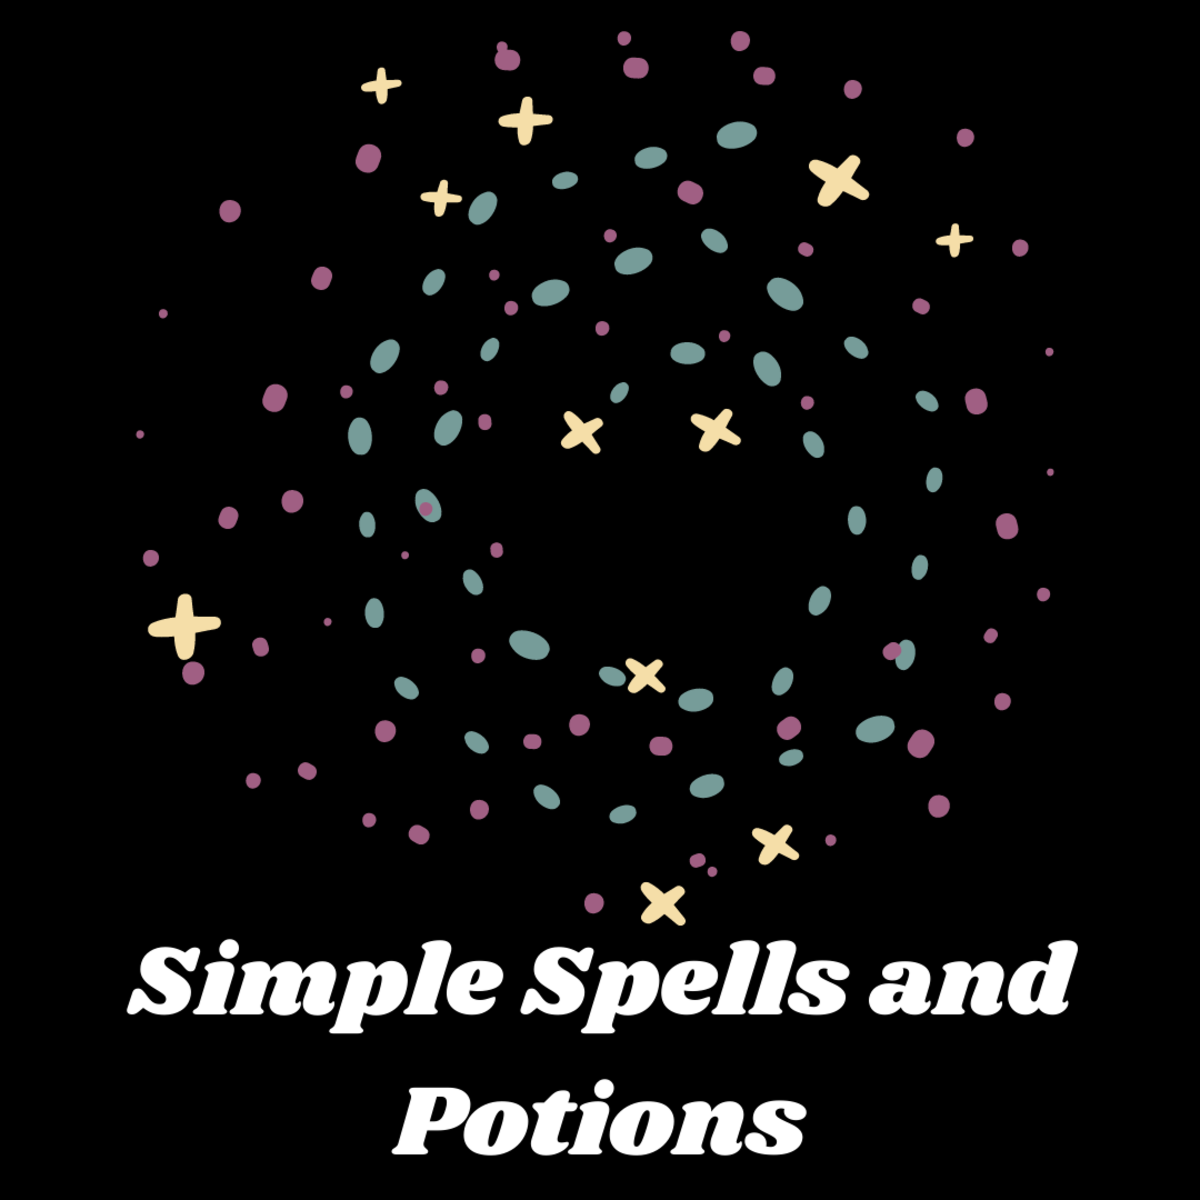 Read on to learn how to perform simple spells and potions.